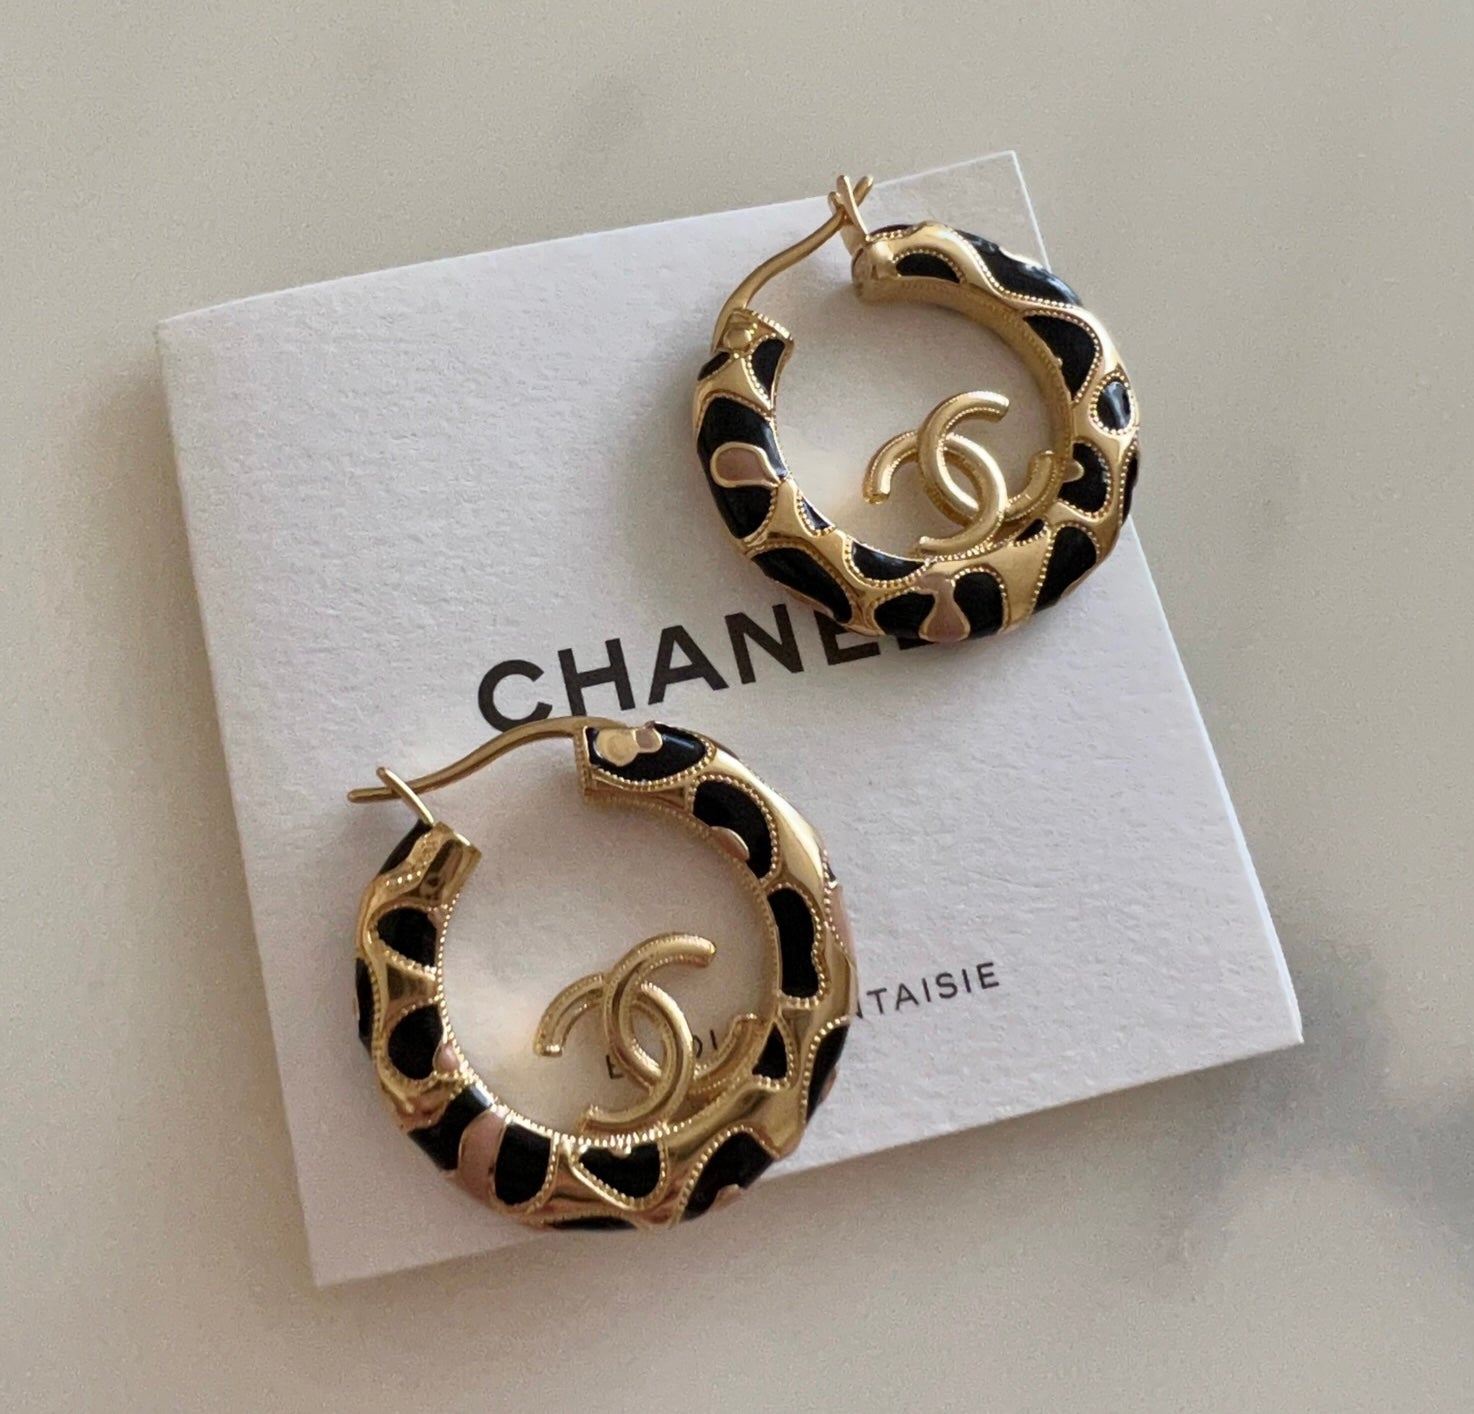 Chanel Pink, Black and Gold CC Classic Flap Bag Earrings